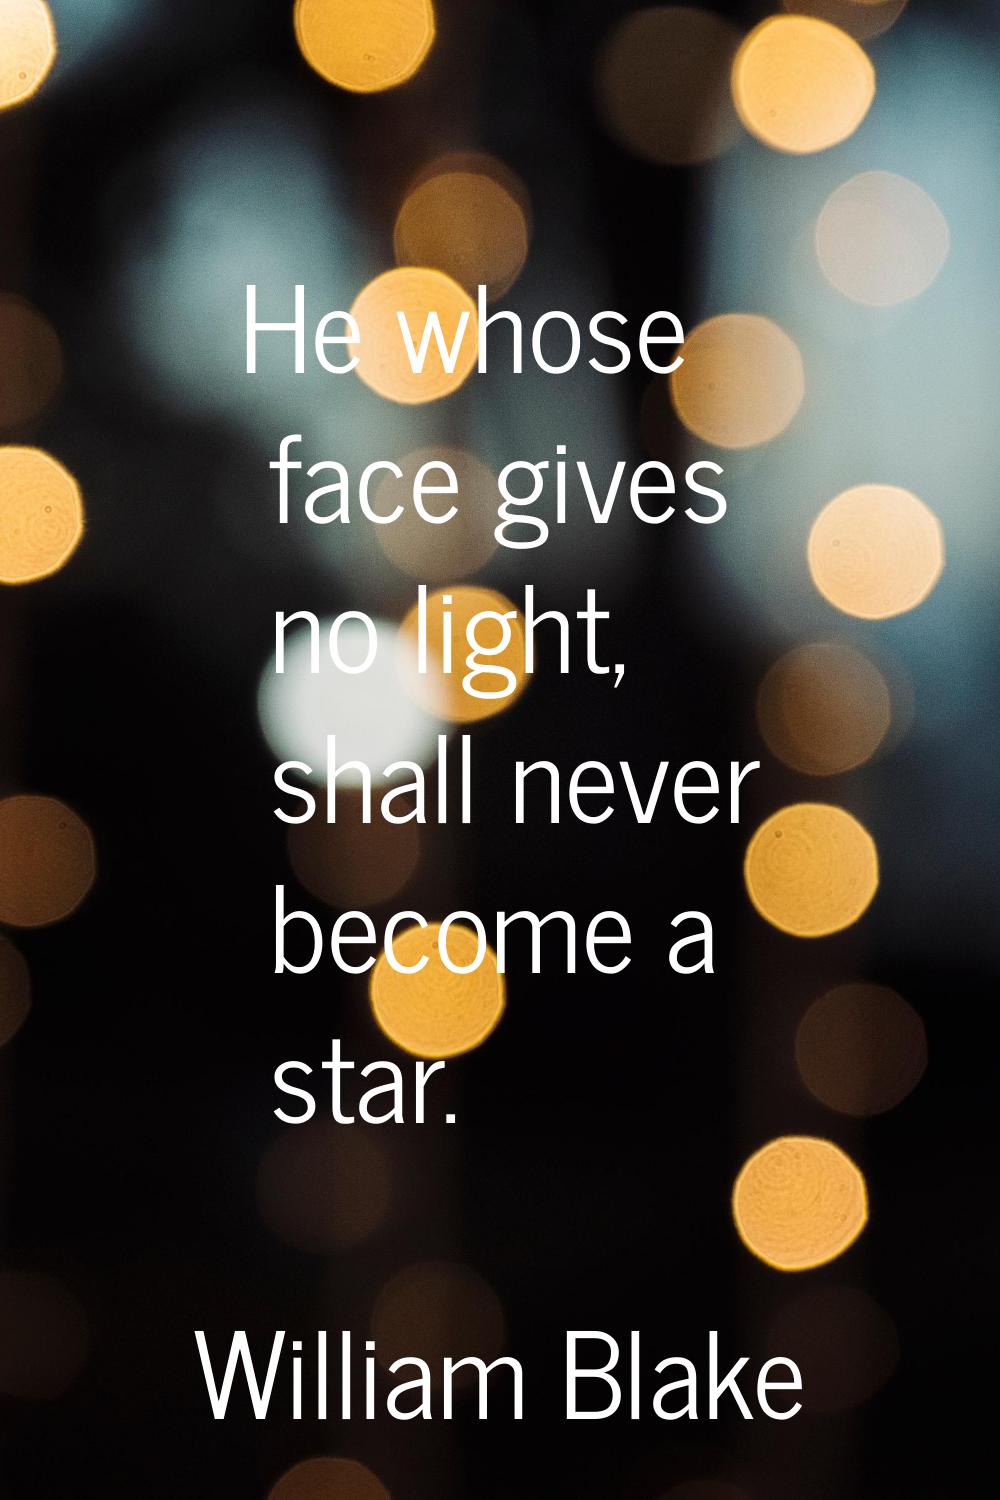 He whose face gives no light, shall never become a star.